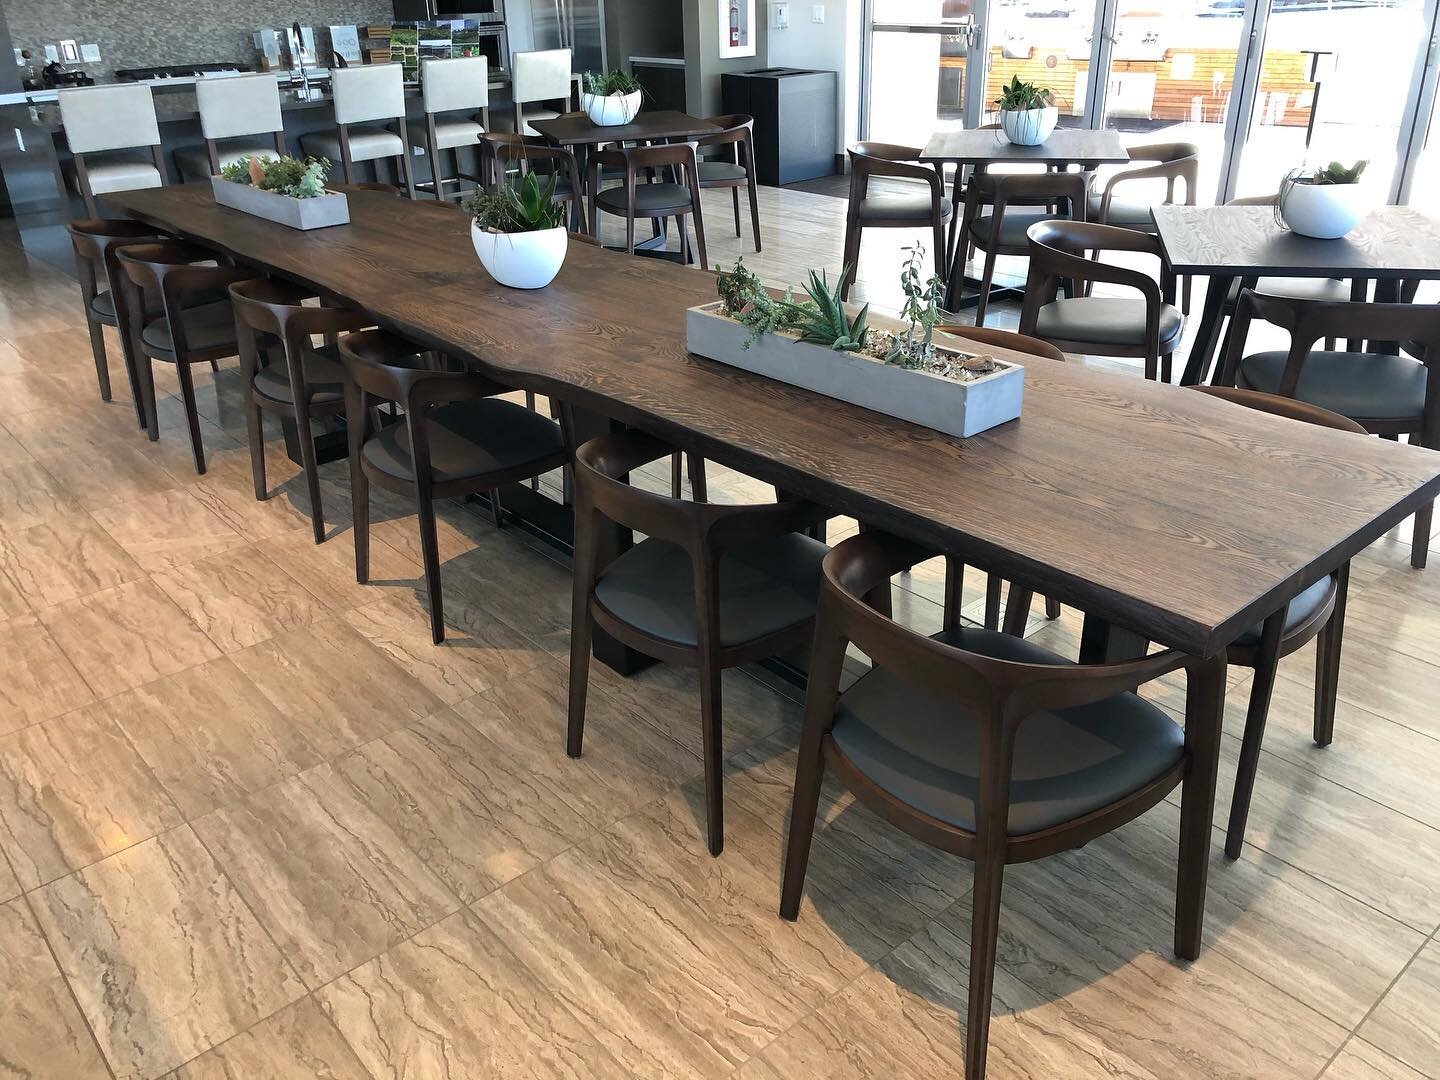 @lakehousedenver We used all no VOC and eco friendly finishes on our furniture keeping in line with WELL Building Standard, a certification program that sets a new bar for building enriching spaces that optimize a resident&rsquo;s living experience. 